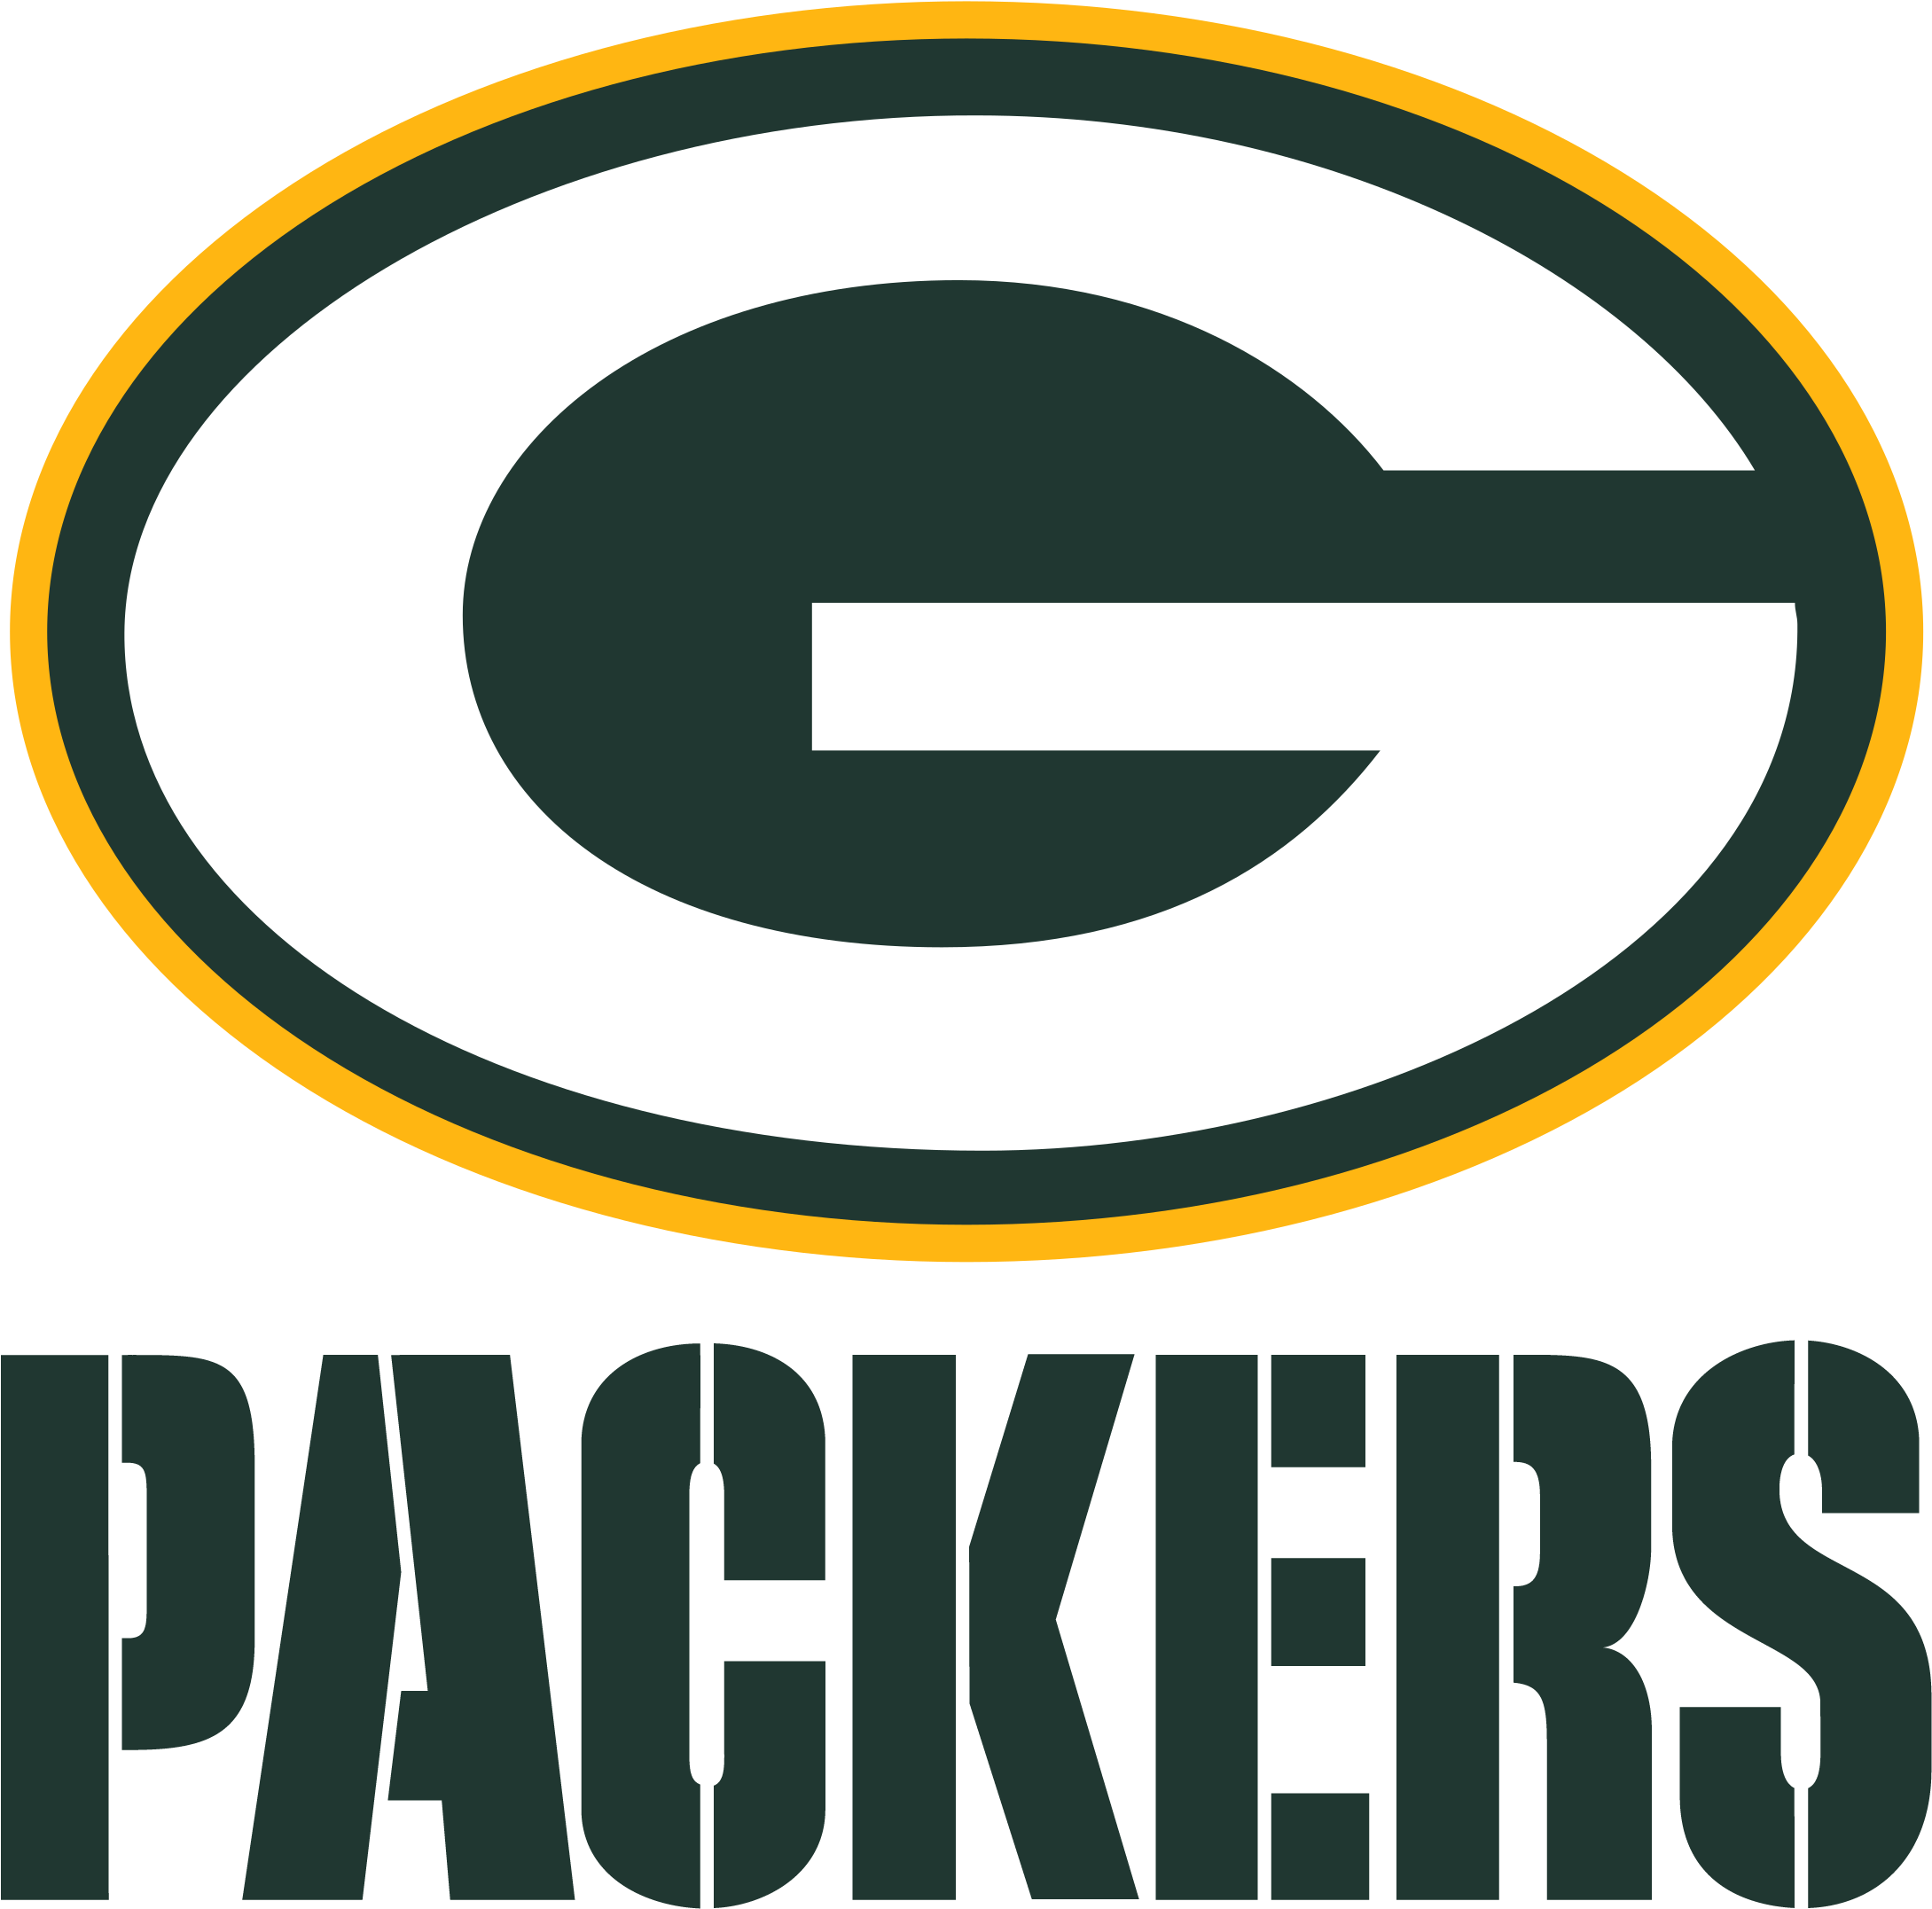 Green Bay Packers Logo Png Transparent Svg Vector Freebie - Green Bay Packers (2400x2400)